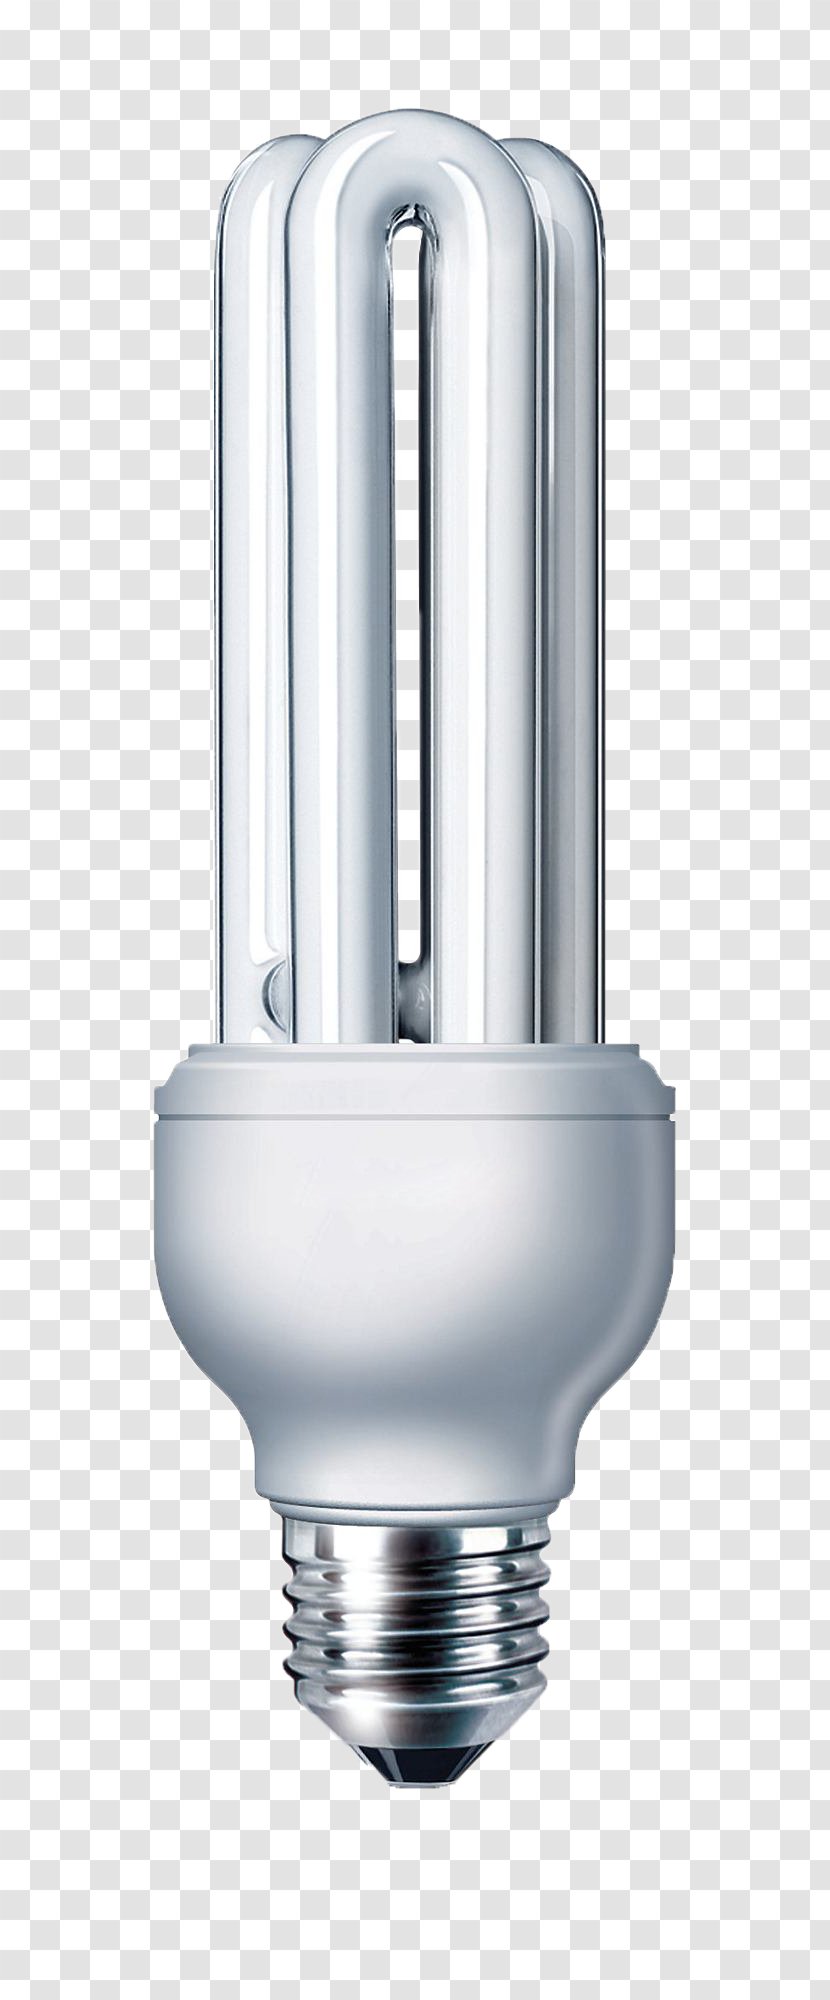 Incandescent Light Bulb Compact Fluorescent Lamp Philips Lighting - Price - Real Three Standard Port Transparent PNG